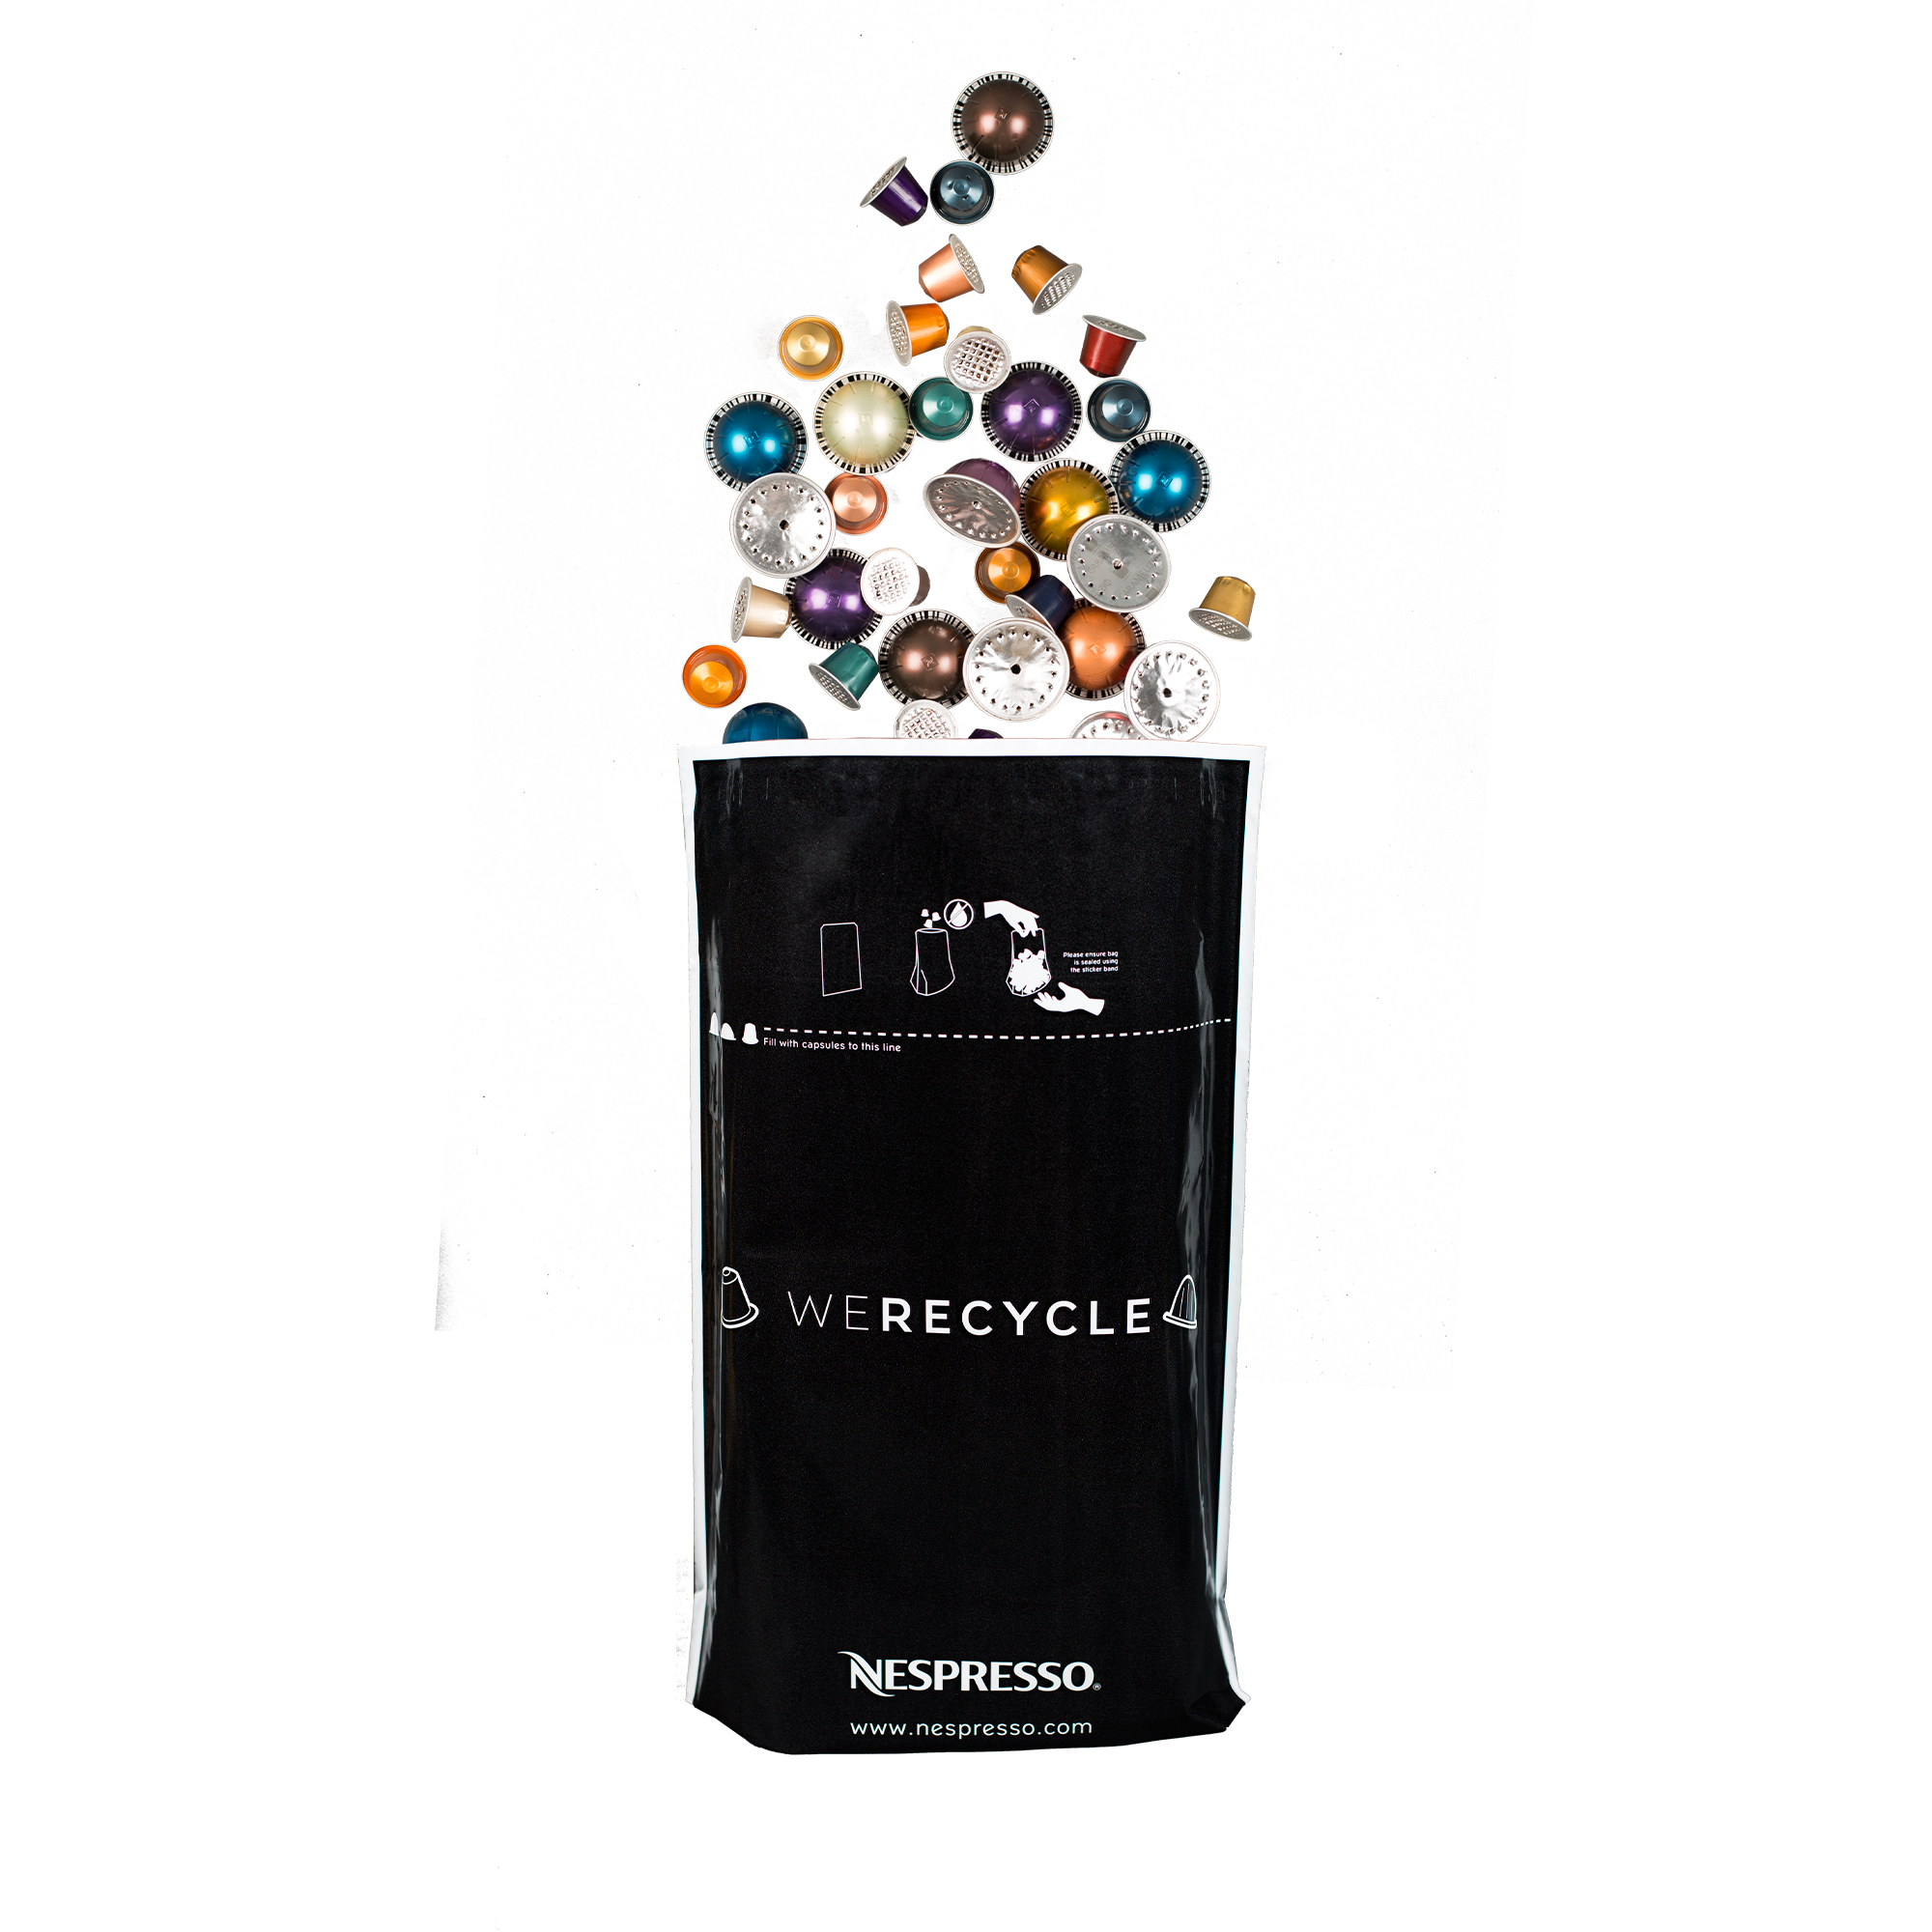 nespresso recycling collection